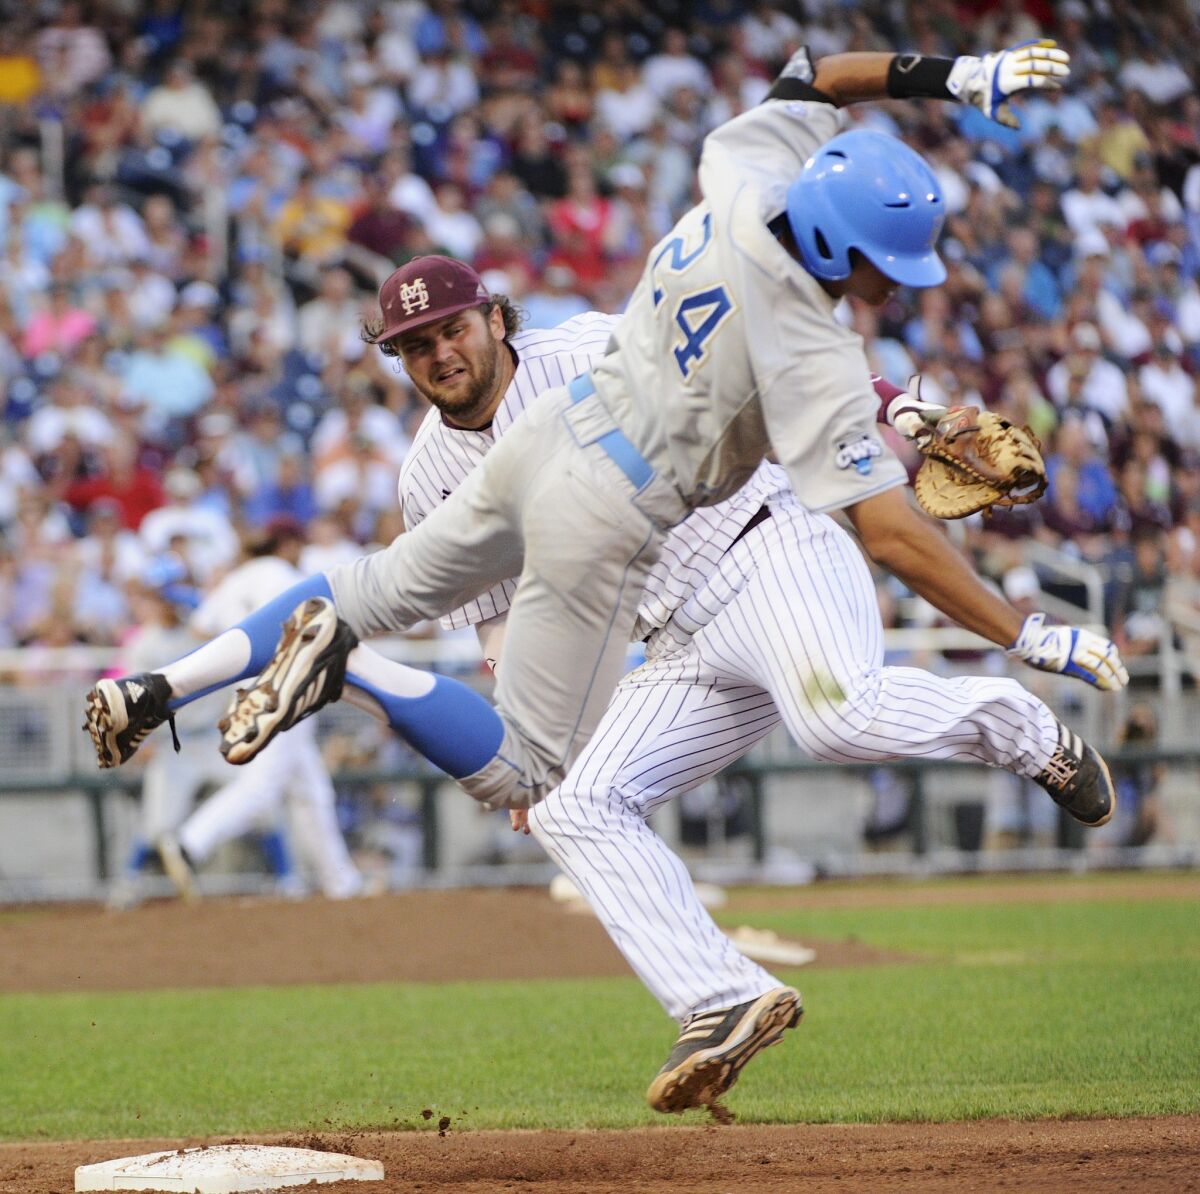 UCLA's Brian Carroll, right, and Mississippi State's Wes Rea collide a first base during the fourth inning of Game 1 of the College World Series on Monday.